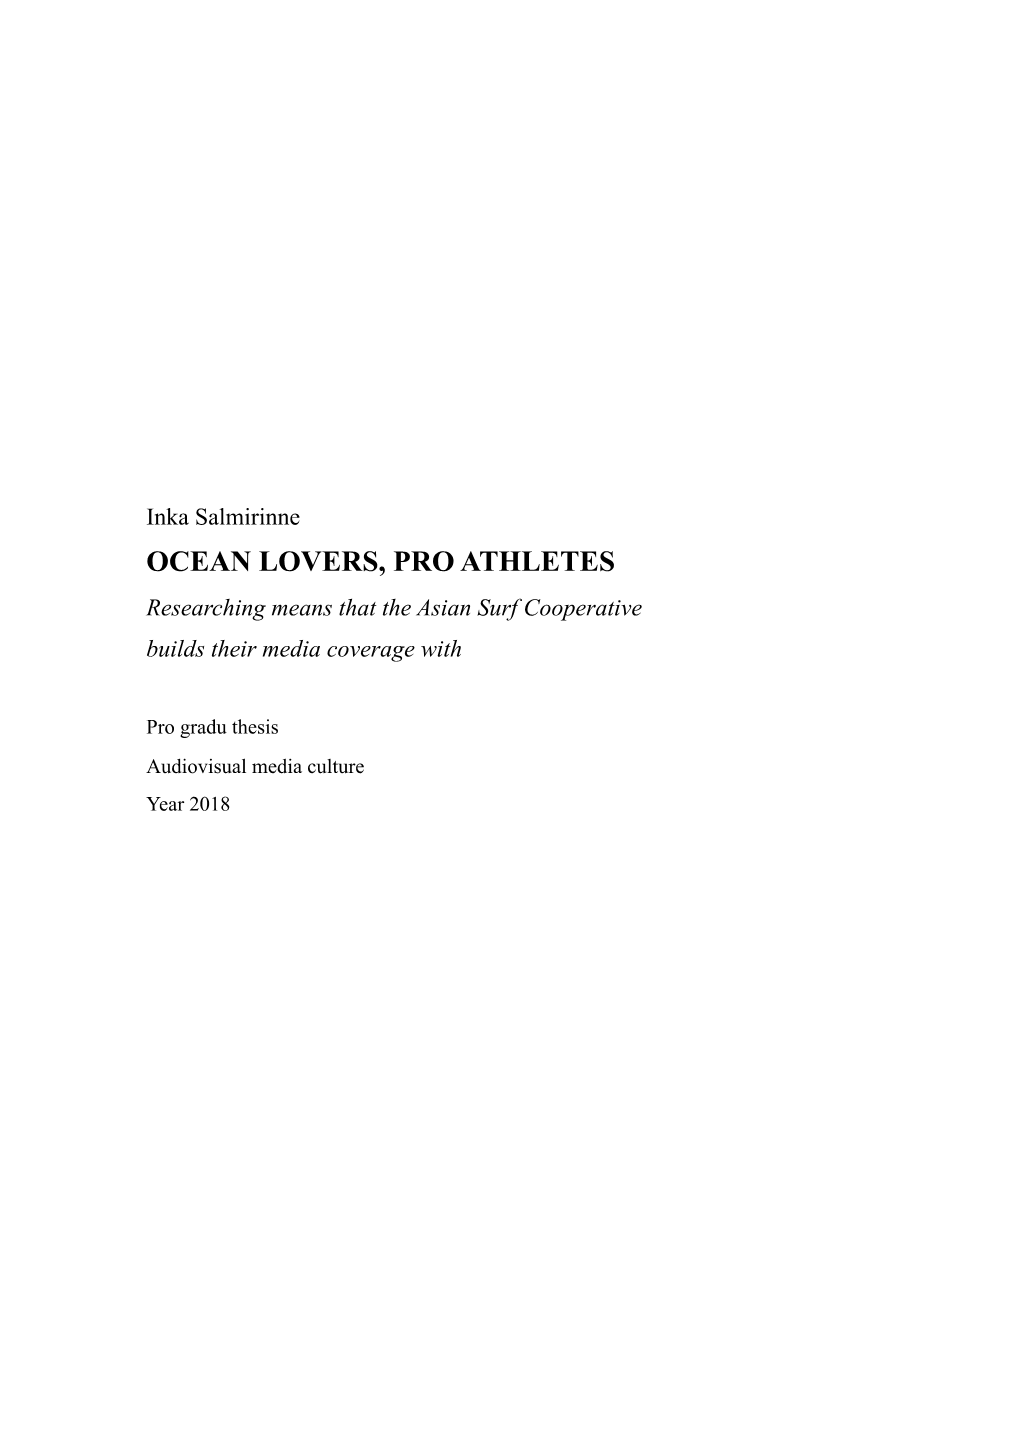 OCEAN LOVERS, PRO ATHLETES Researching Means That the Asian Surf Cooperative Builds Their Media Coverage With